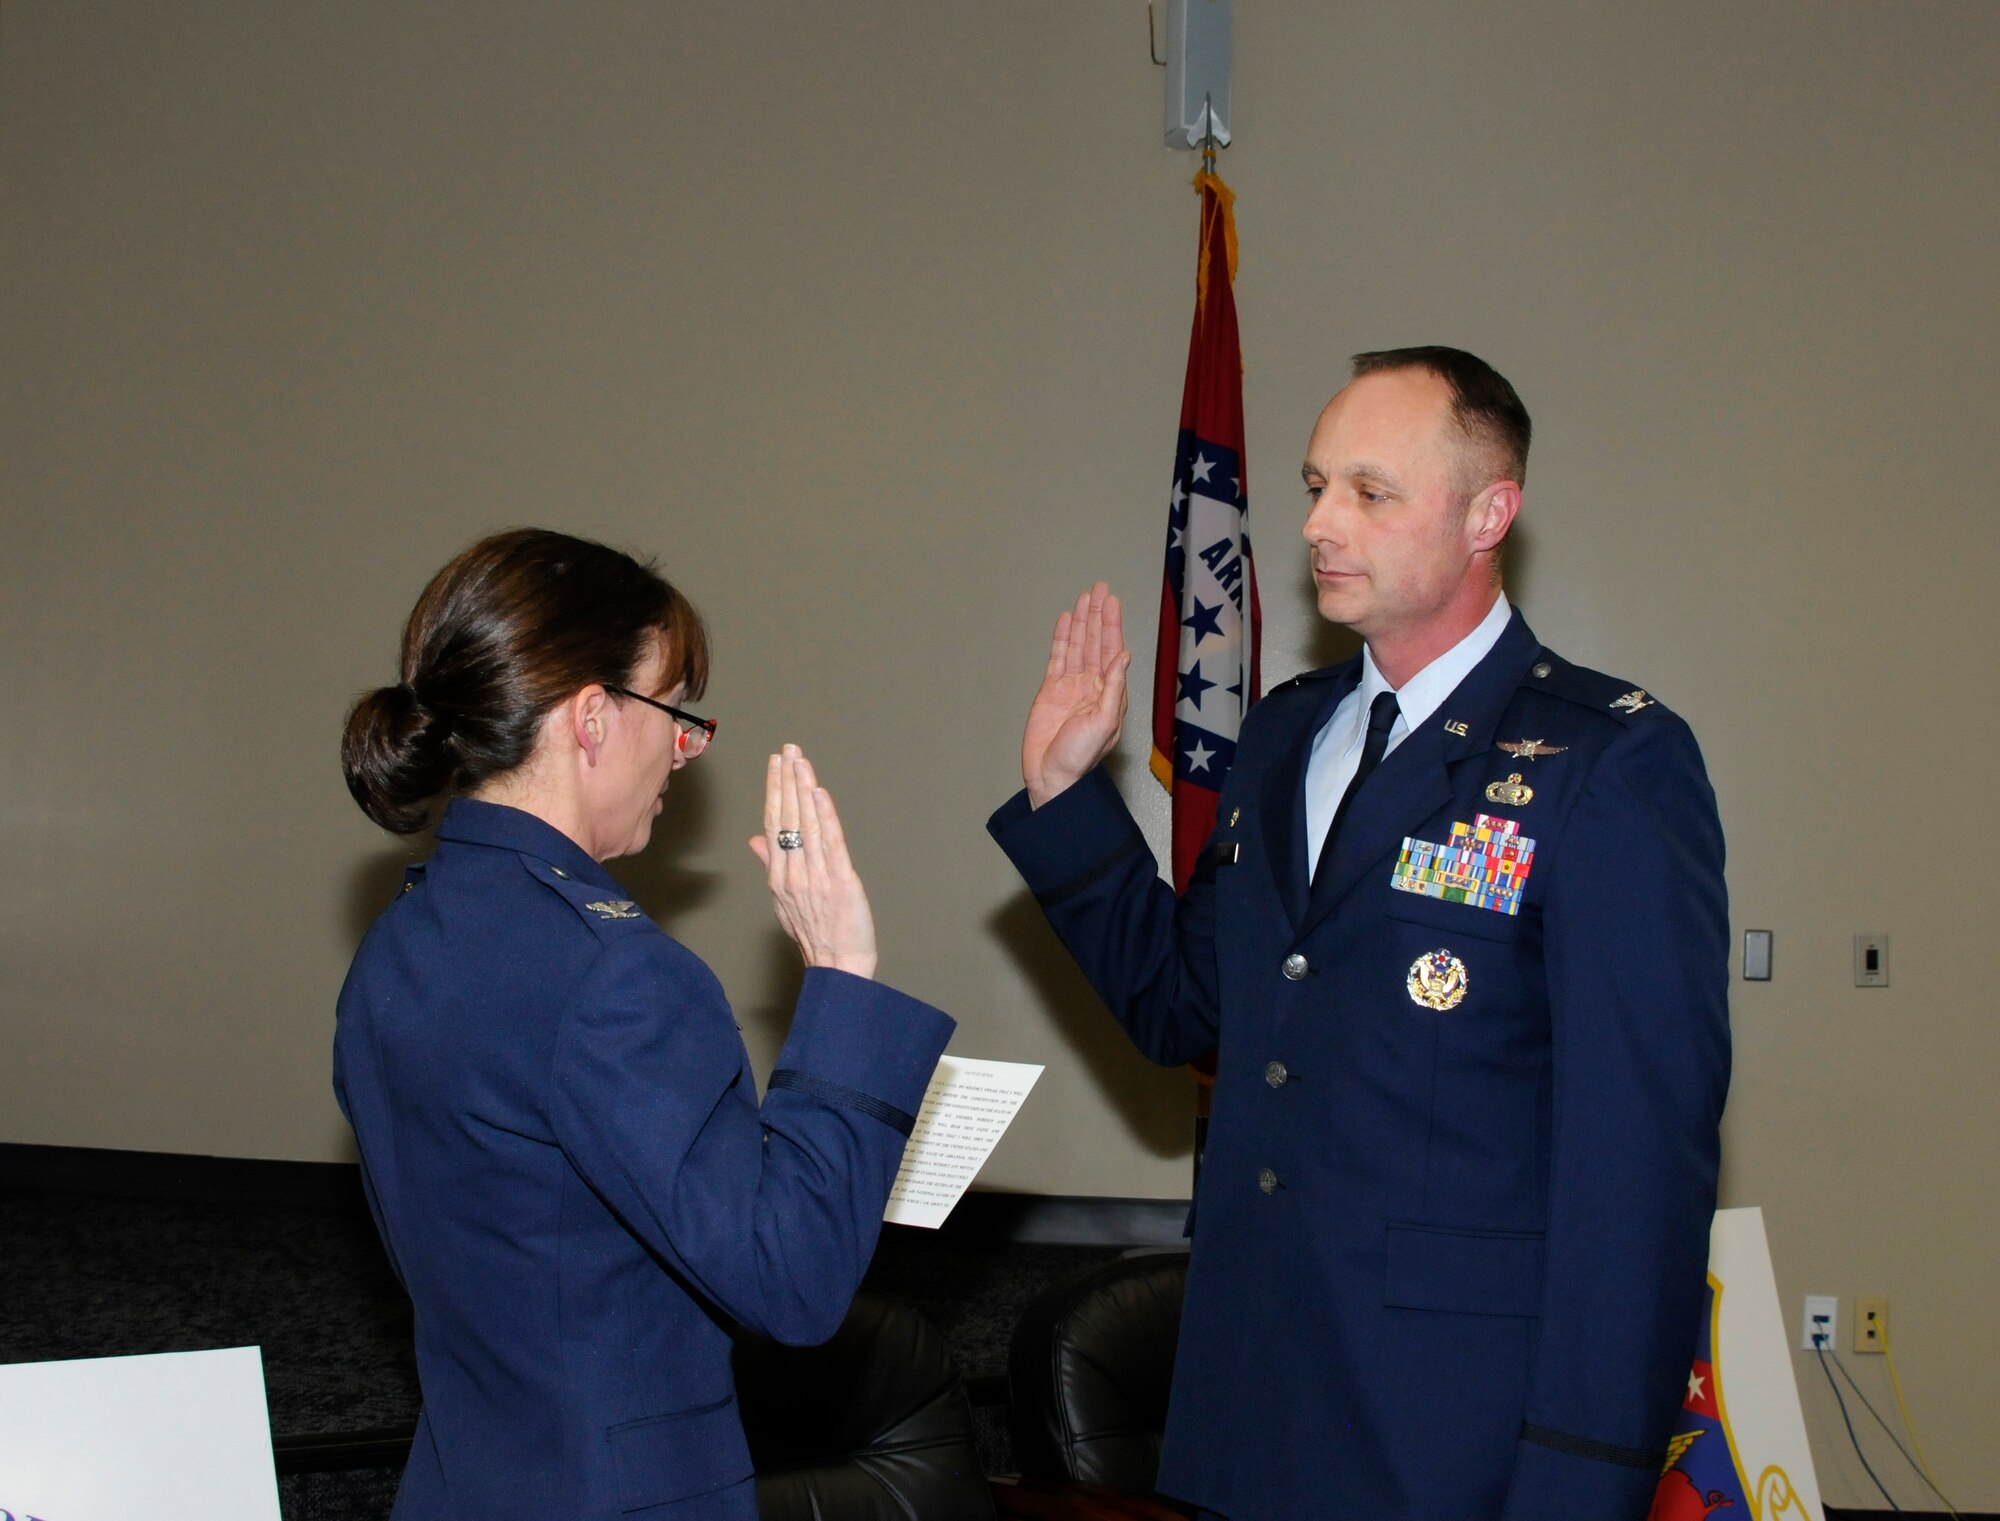 Col. Paige I. Kinney administers the reaffirmation oath to Col. Robert I. Kinney, 188th Intelligence, Surveillance and Reconnaissance Group commander, after promoting him to his present rank during a formal promotion ceremony held Feb. 8, 2015 at Ebbing Air National Guard Base, Fort Smith, Ark. Robert Kinney joined the Air National Guard in 1990 and has spent time in various positions throughout the country in the intelligence career field. The ceremony was presided by his wife, Paige Kinney, director of Intelligence, Surveillance and Reconnaissance at the Continental U.S. North American Aerospace Defense Command Region, 1st Air Force, Air Forces Northern, Tyndall Air Force Base, Fla. (U.S. Air National Guard photo by Staff Sgt. Hannah Dickerson/released)